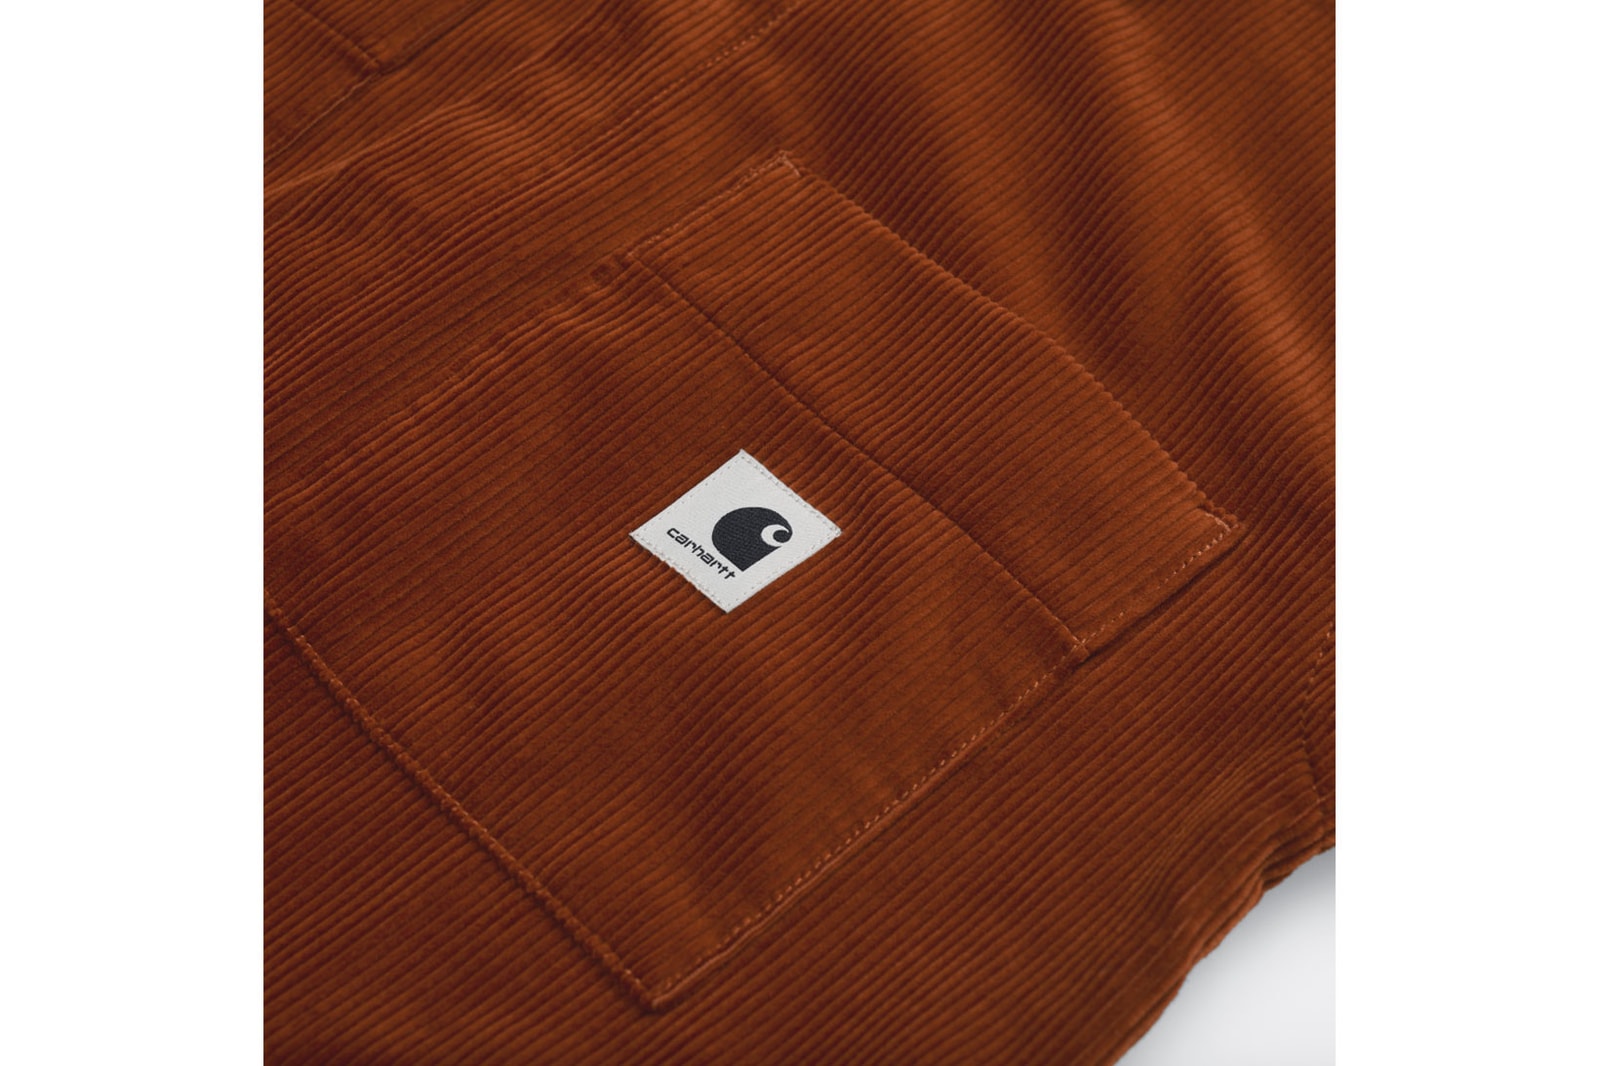 carhartt wip tactile classics corduroy collection fall winter jackets shirts overalls